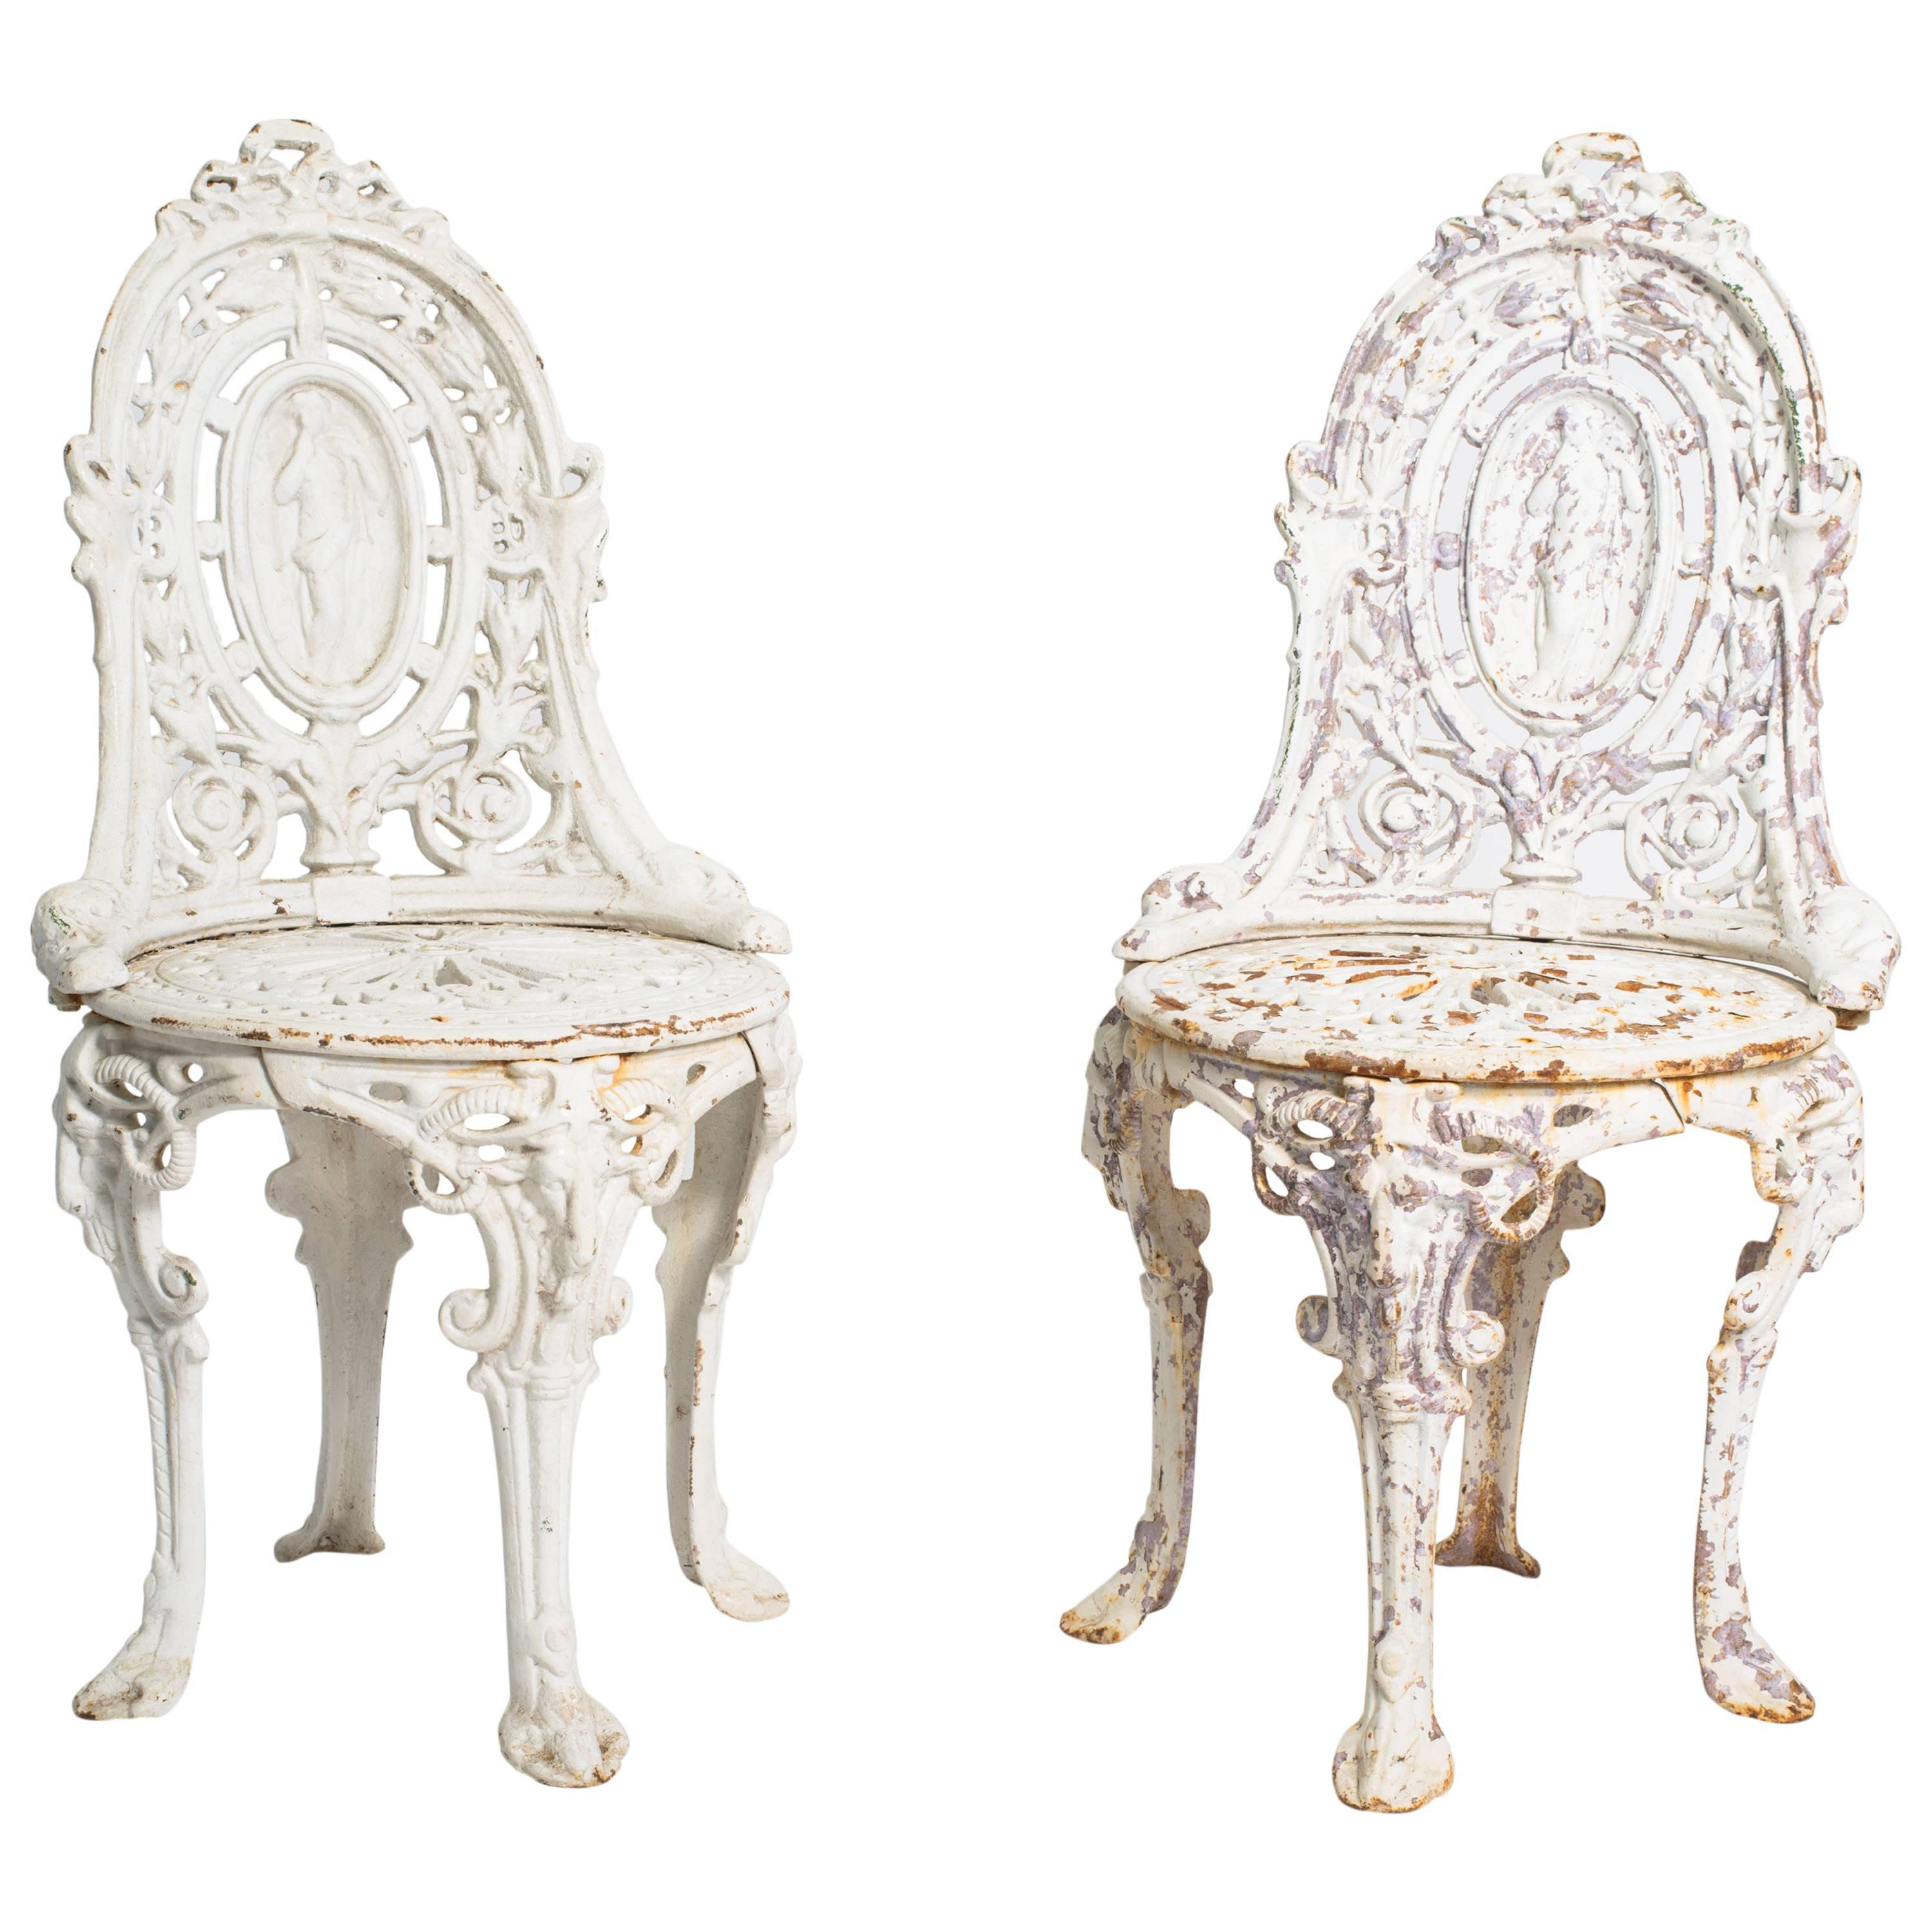 Early 20th Century English Garden Chairs For Sale